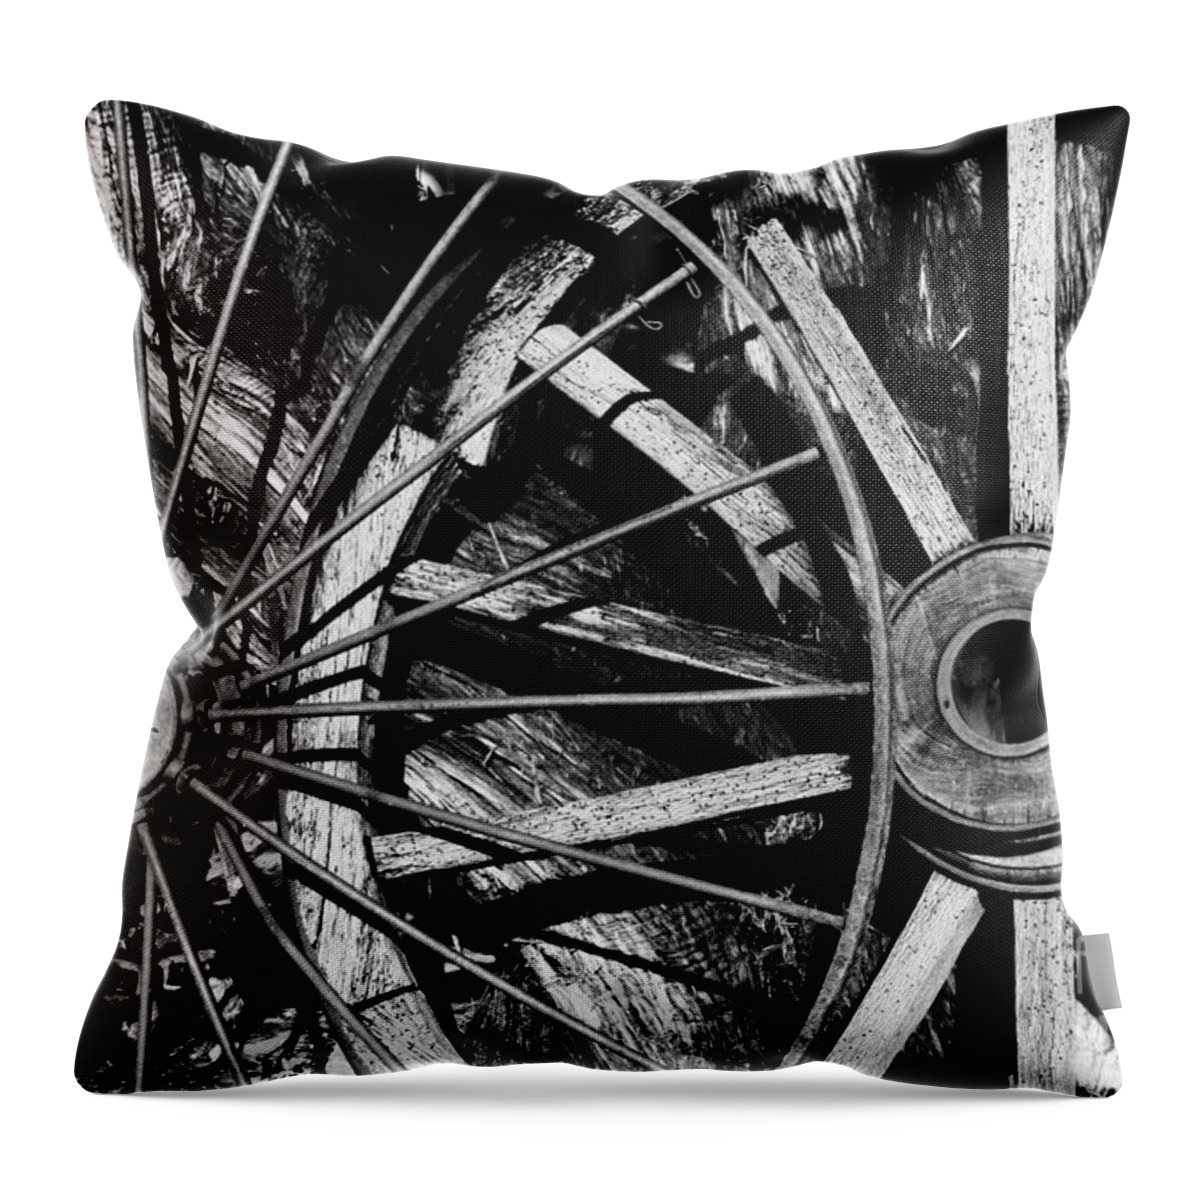 Antique Throw Pillow featuring the photograph Totally Spoked by Phil Cappiali Jr